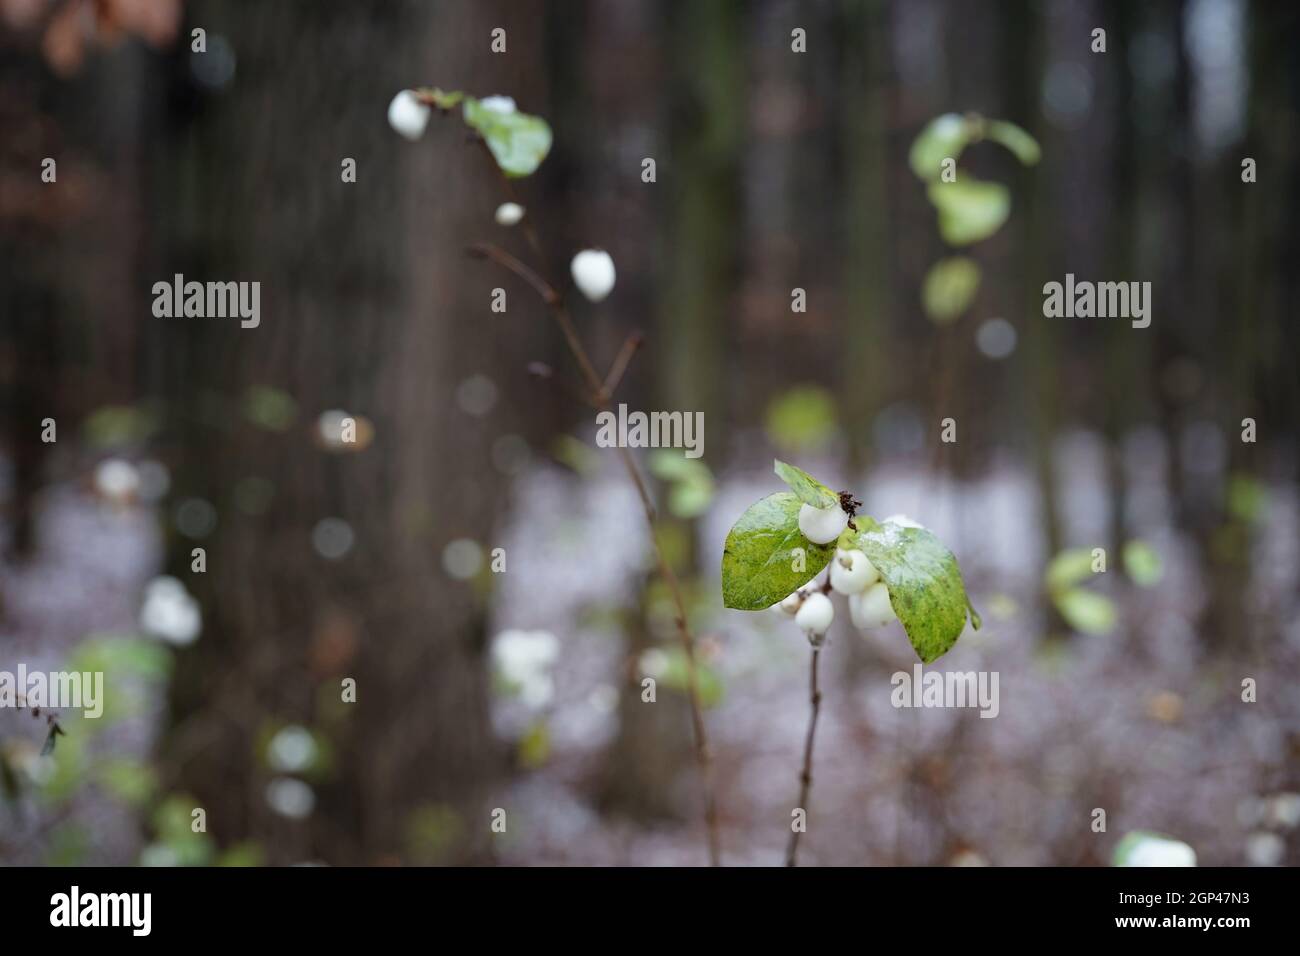 The end of November in the forest, wet leaves and fruits of the white snowberry, the beginning of winter in the era of global warming, copy space Stock Photo